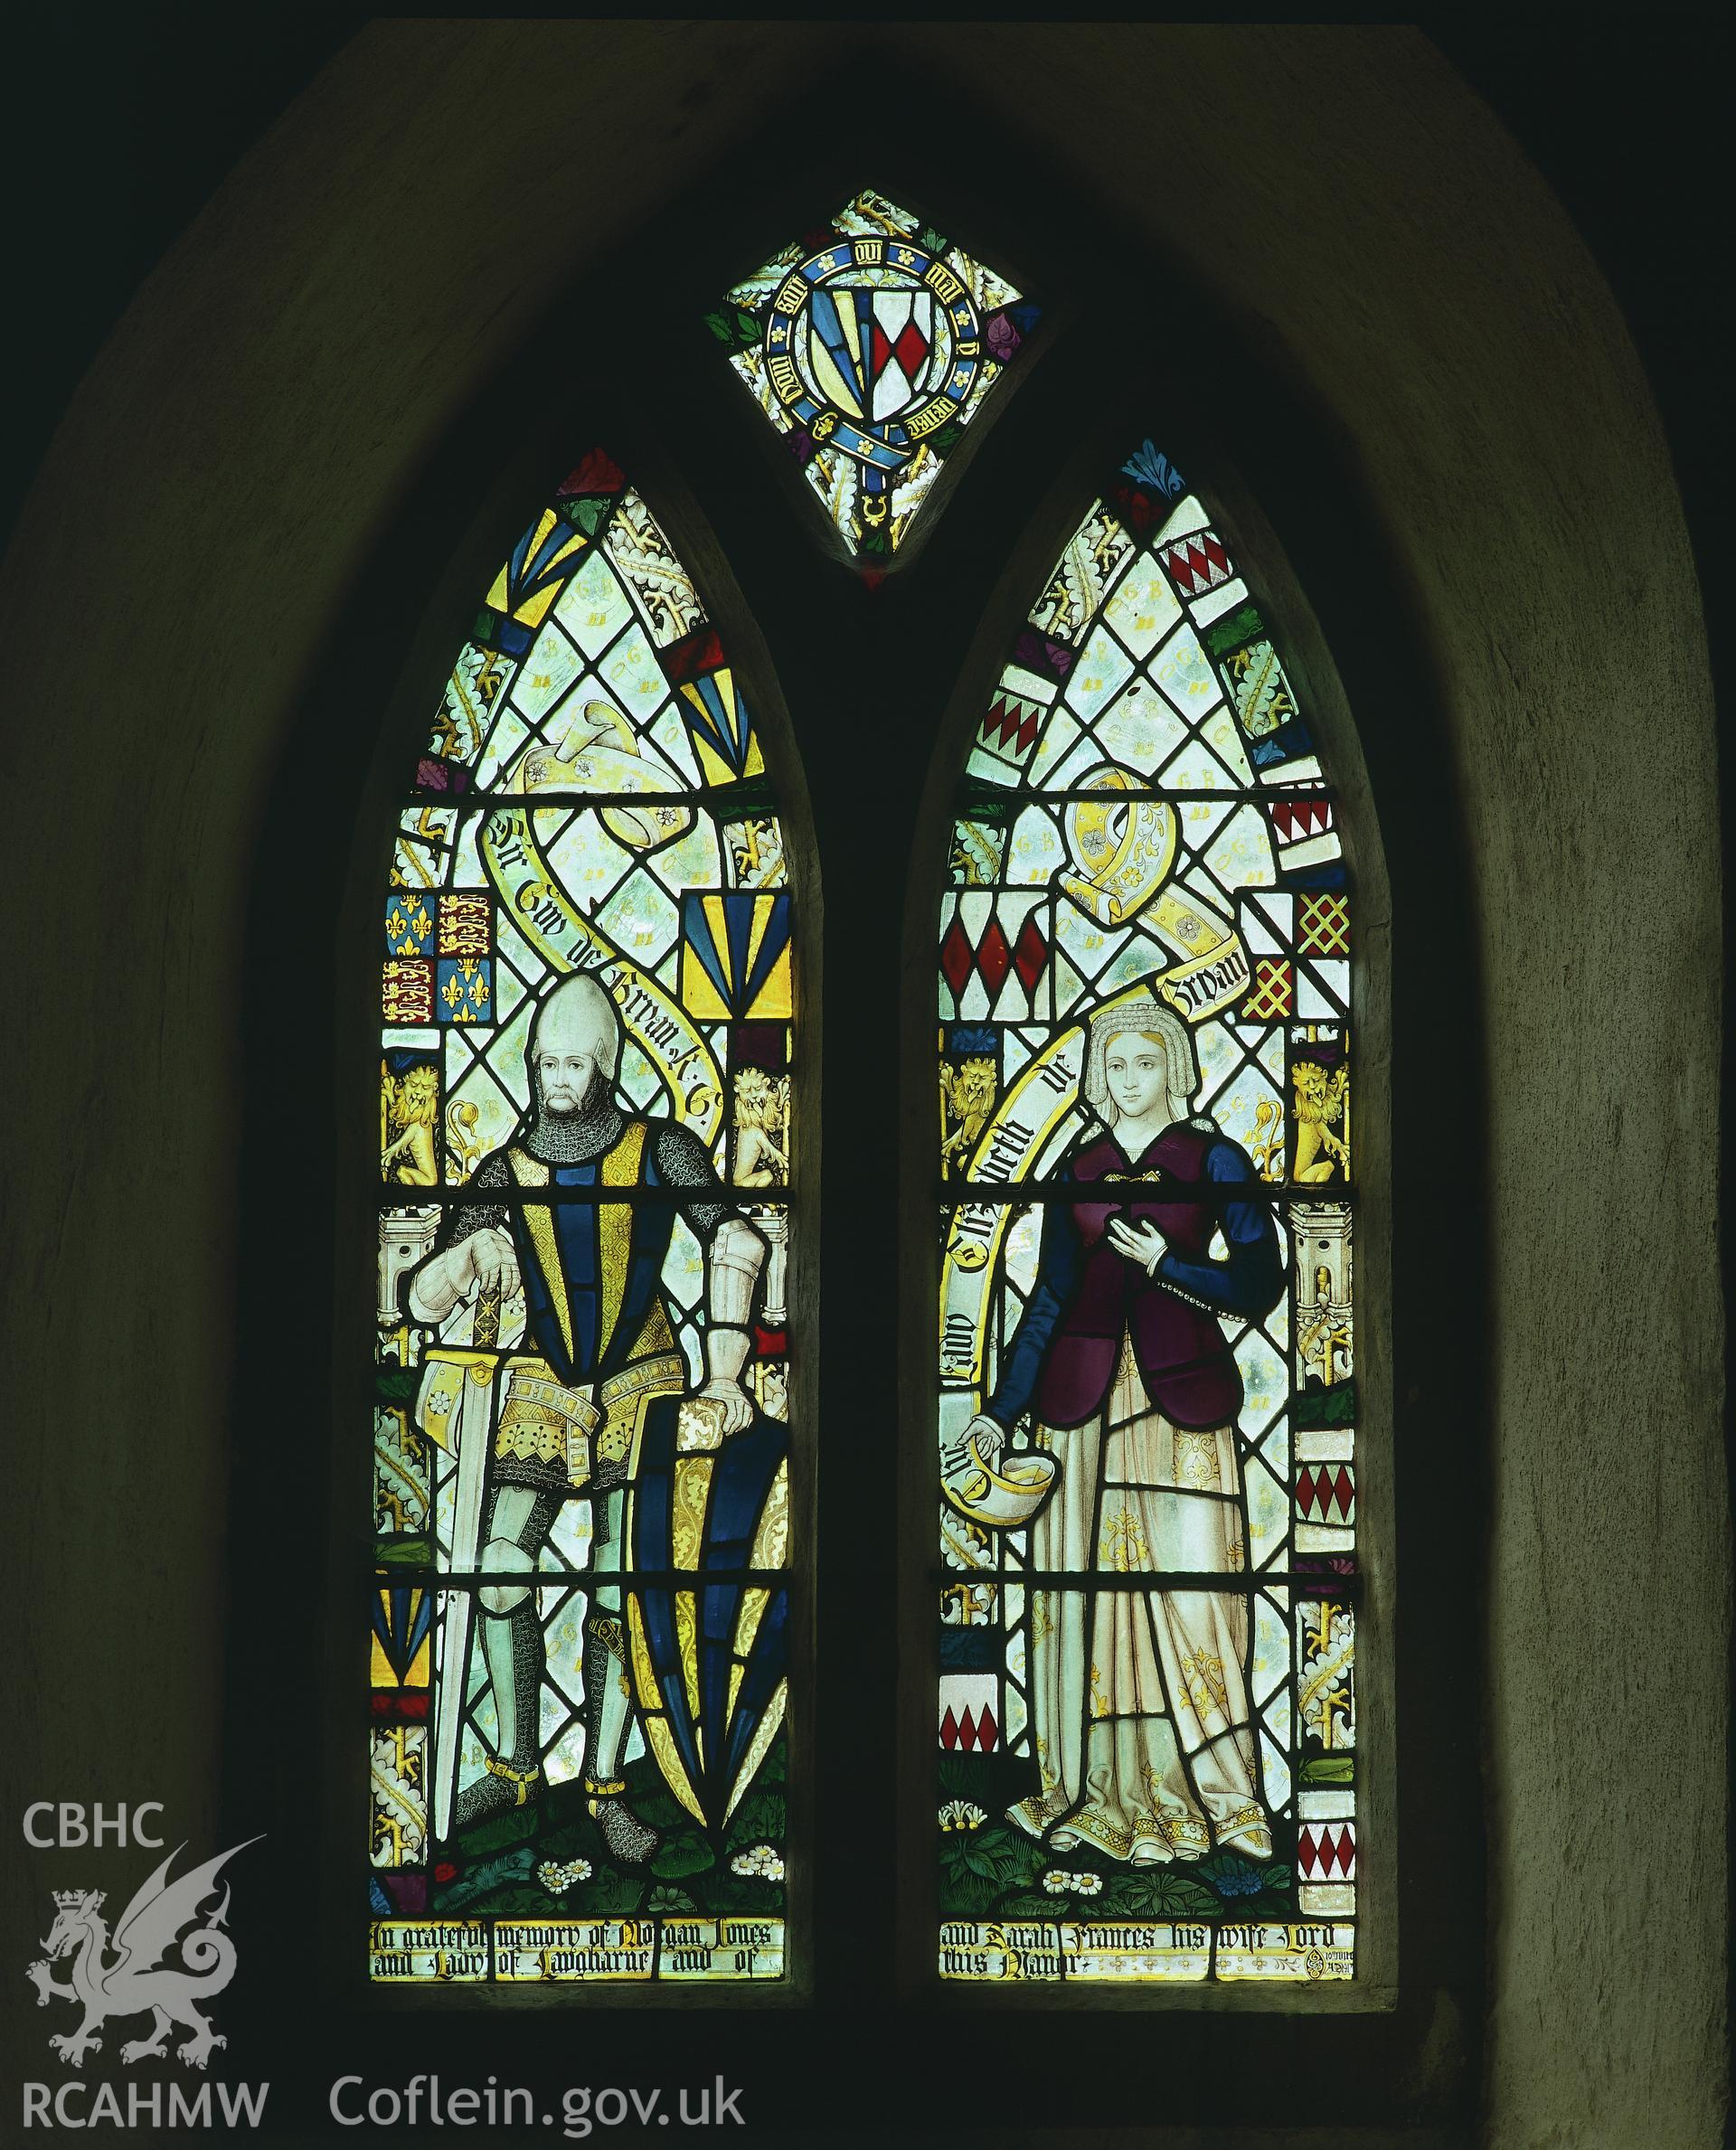 RCAHMW colour transparency showing stained glass at the west end of St Margaret's Church, Eglwyscumin.